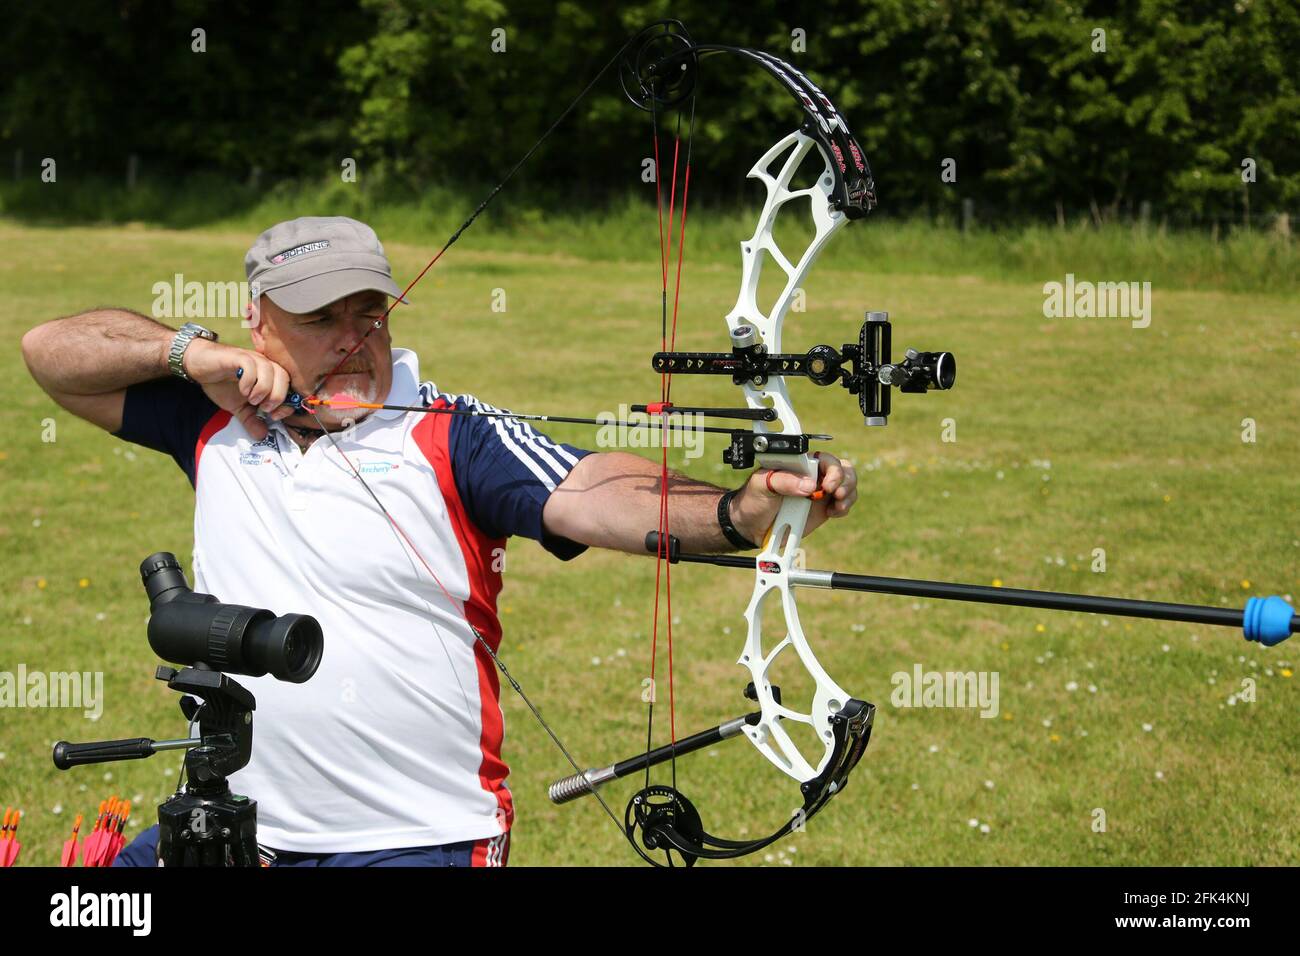 Ayr Archery Club held an open day 'Come and try Archery ' at the J.Mowatt playing fields Doonside, Ayr Paralympic archer Frank Mguire takes aim 05 Jun 2016 Stock Photo